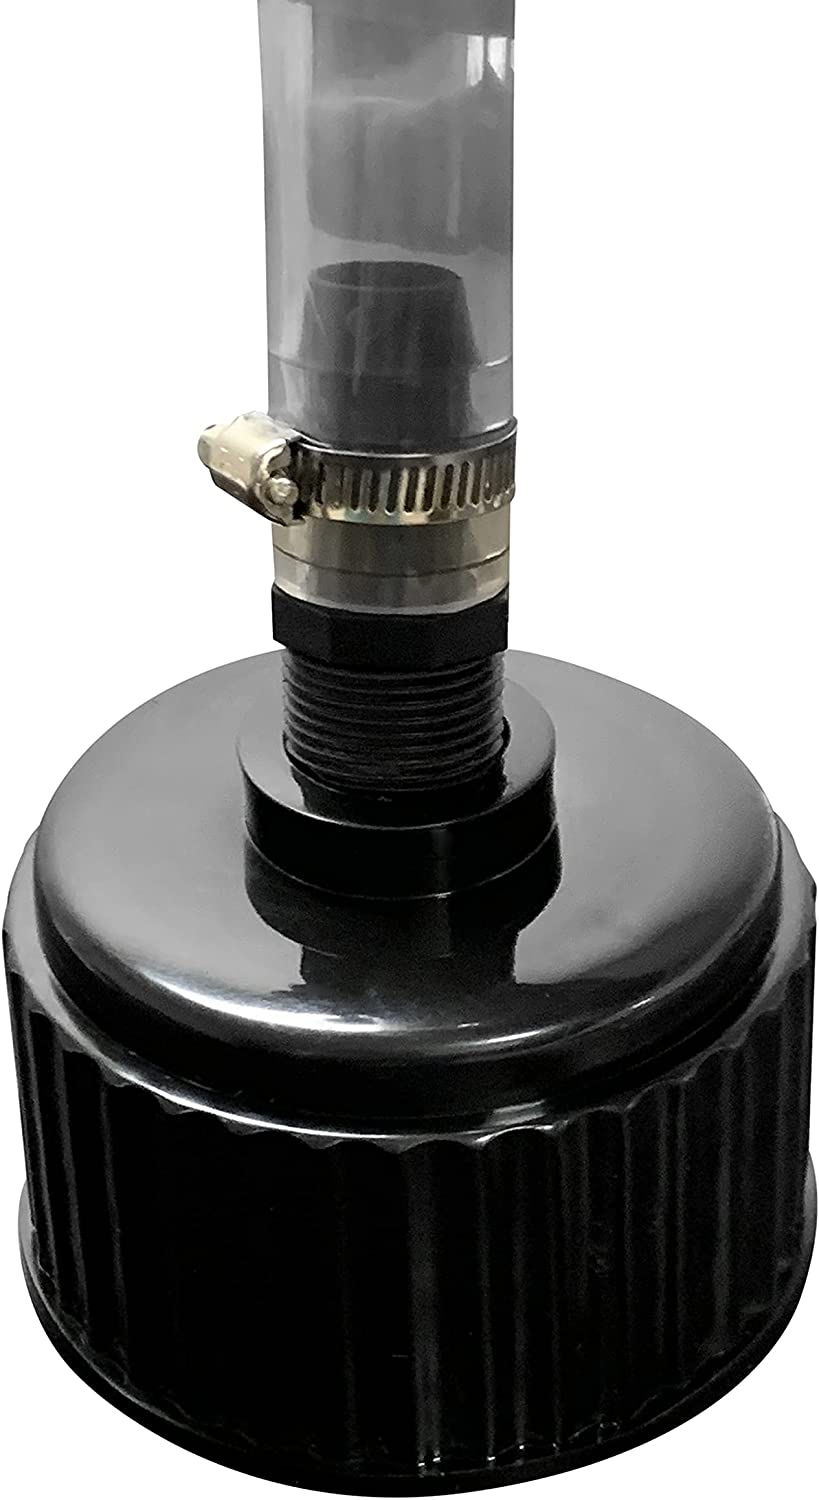 Gas Can Spout Replacement - Gas Can - Racing Fuels Deluxe Filler Hose with cap and vent. Fits VP Racing, Pit Posse, Space Saver, Jazz, Jegs and Scribner (1 PACK) 0.00 freeshipping - Kool Products